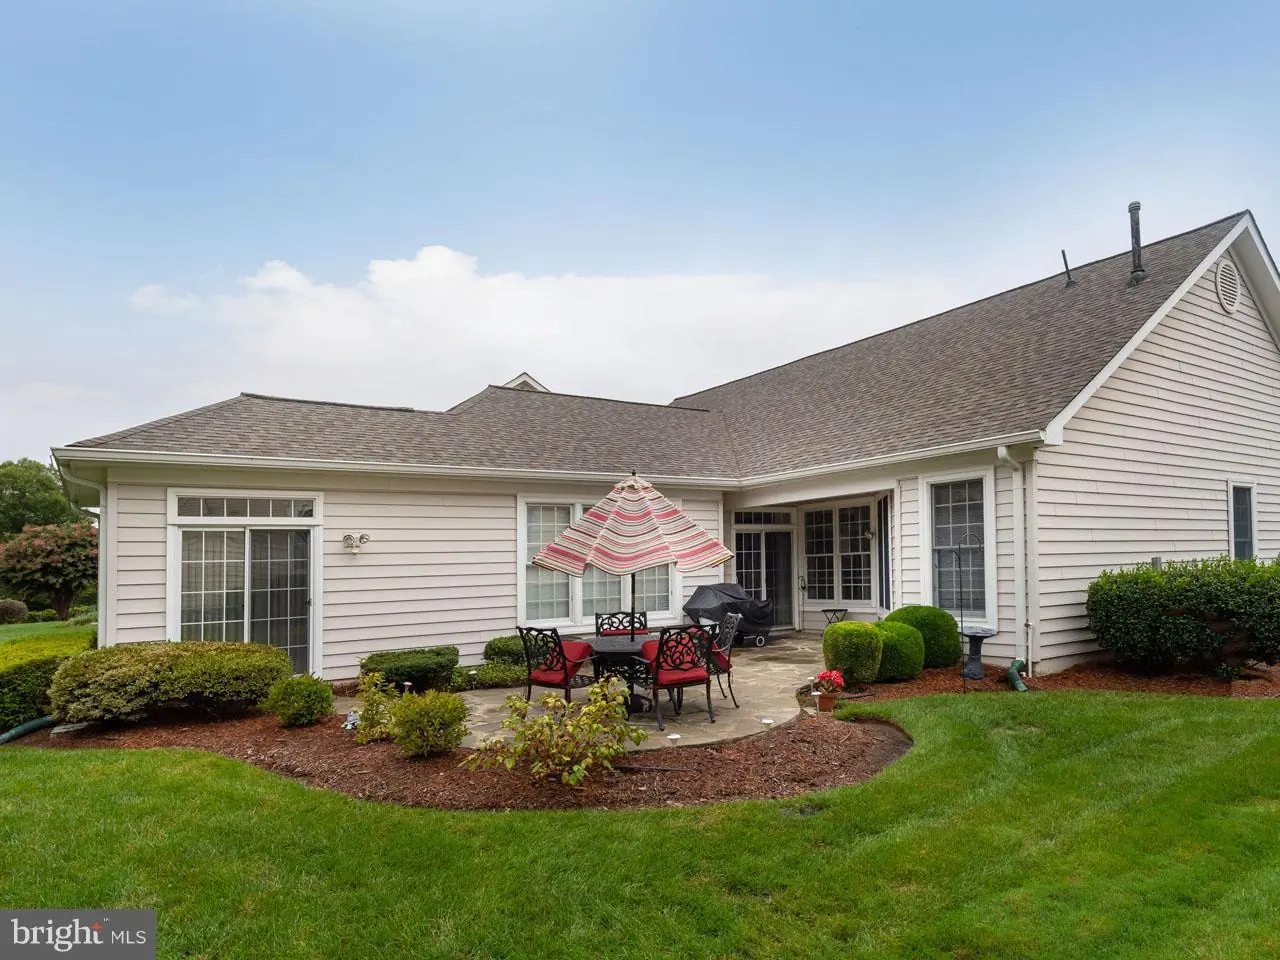 1005040466-300638083703-2018-11-01-11-25-46  |   | Gainesville Delaware Real Estate For Sale | MLS# 1005040466  - Best of Northern Virginia